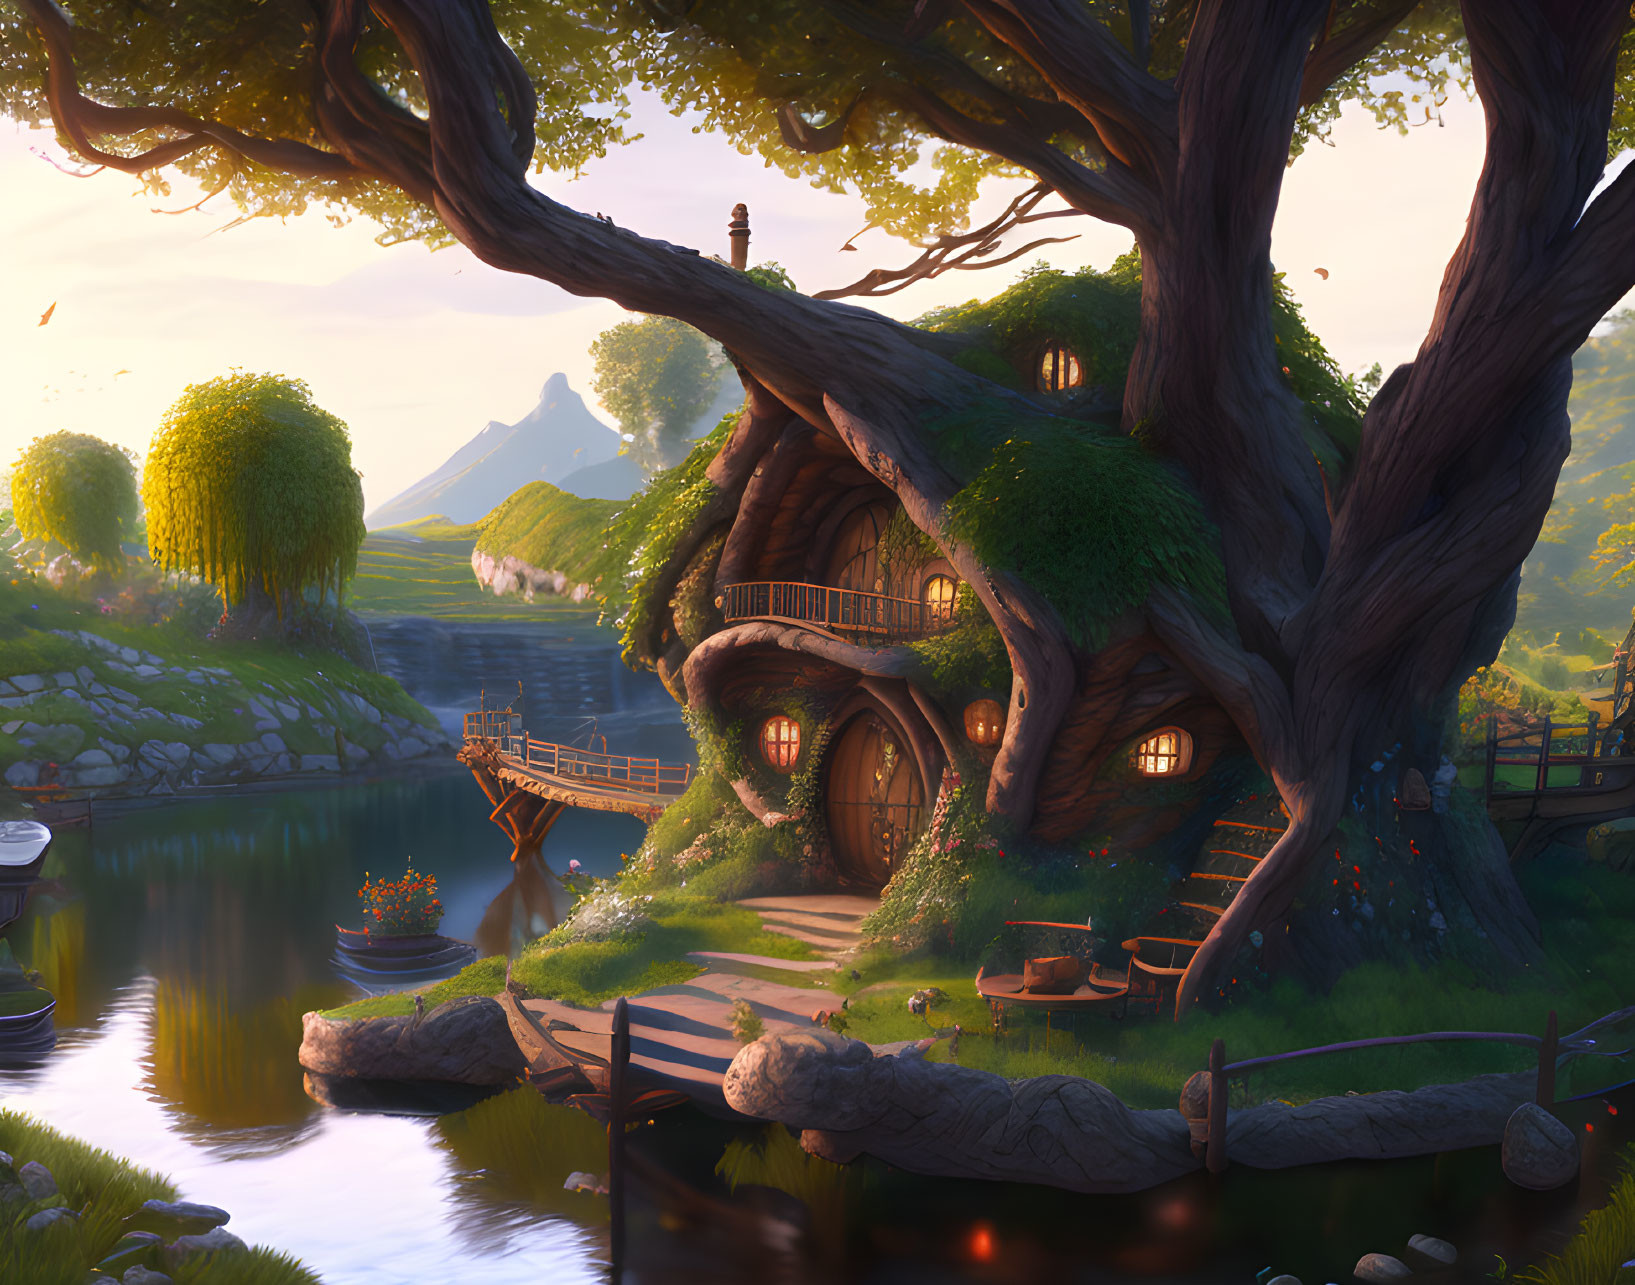 A Hobbit Home on the Lake